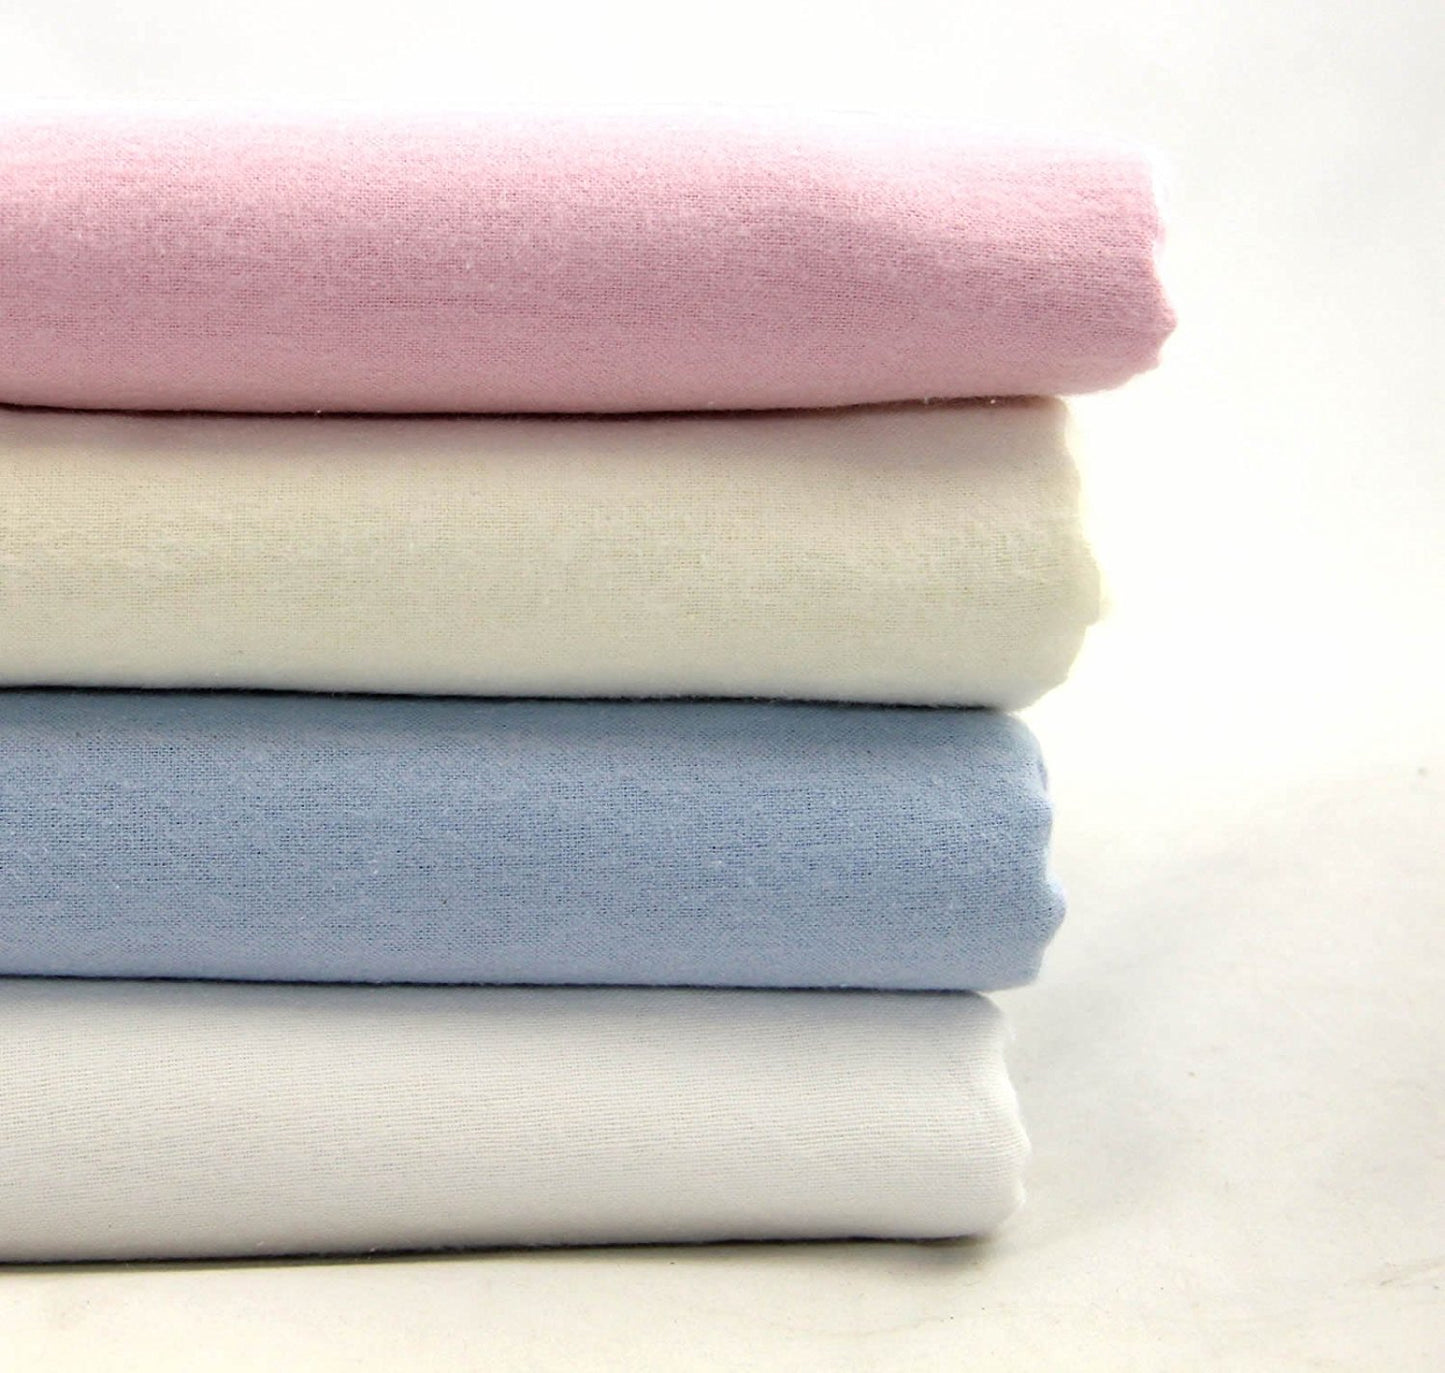 Blue Sheets/Pillow Cases Rigg's Flannelette Sheets